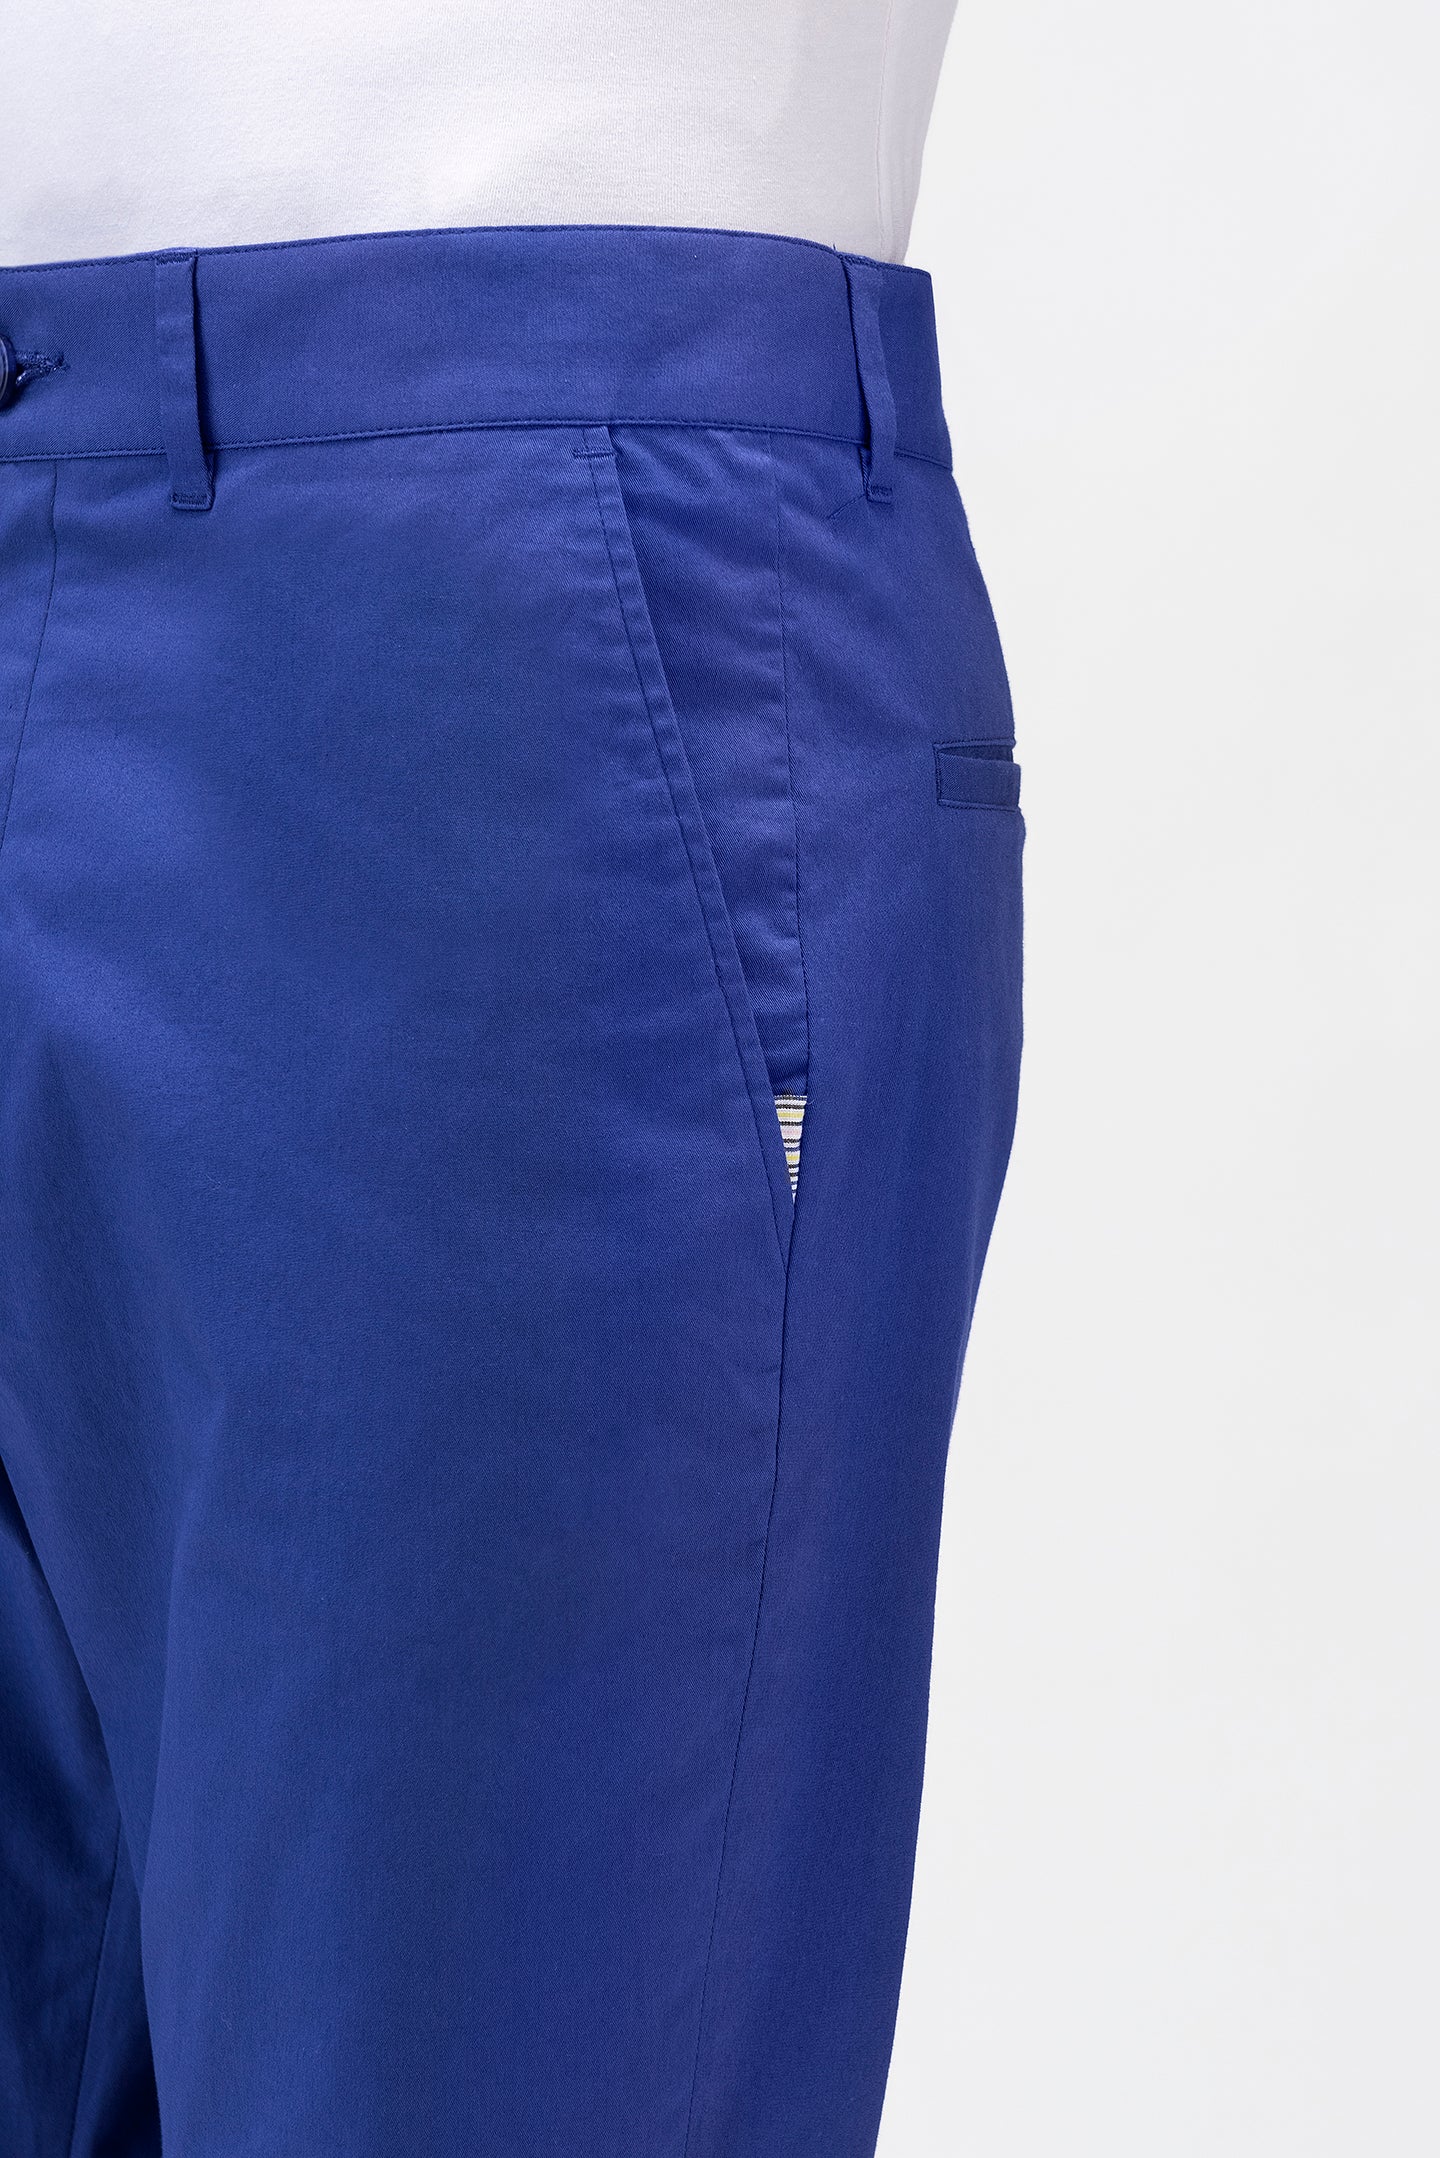 Twill Mens Trousers With Bone Pocket